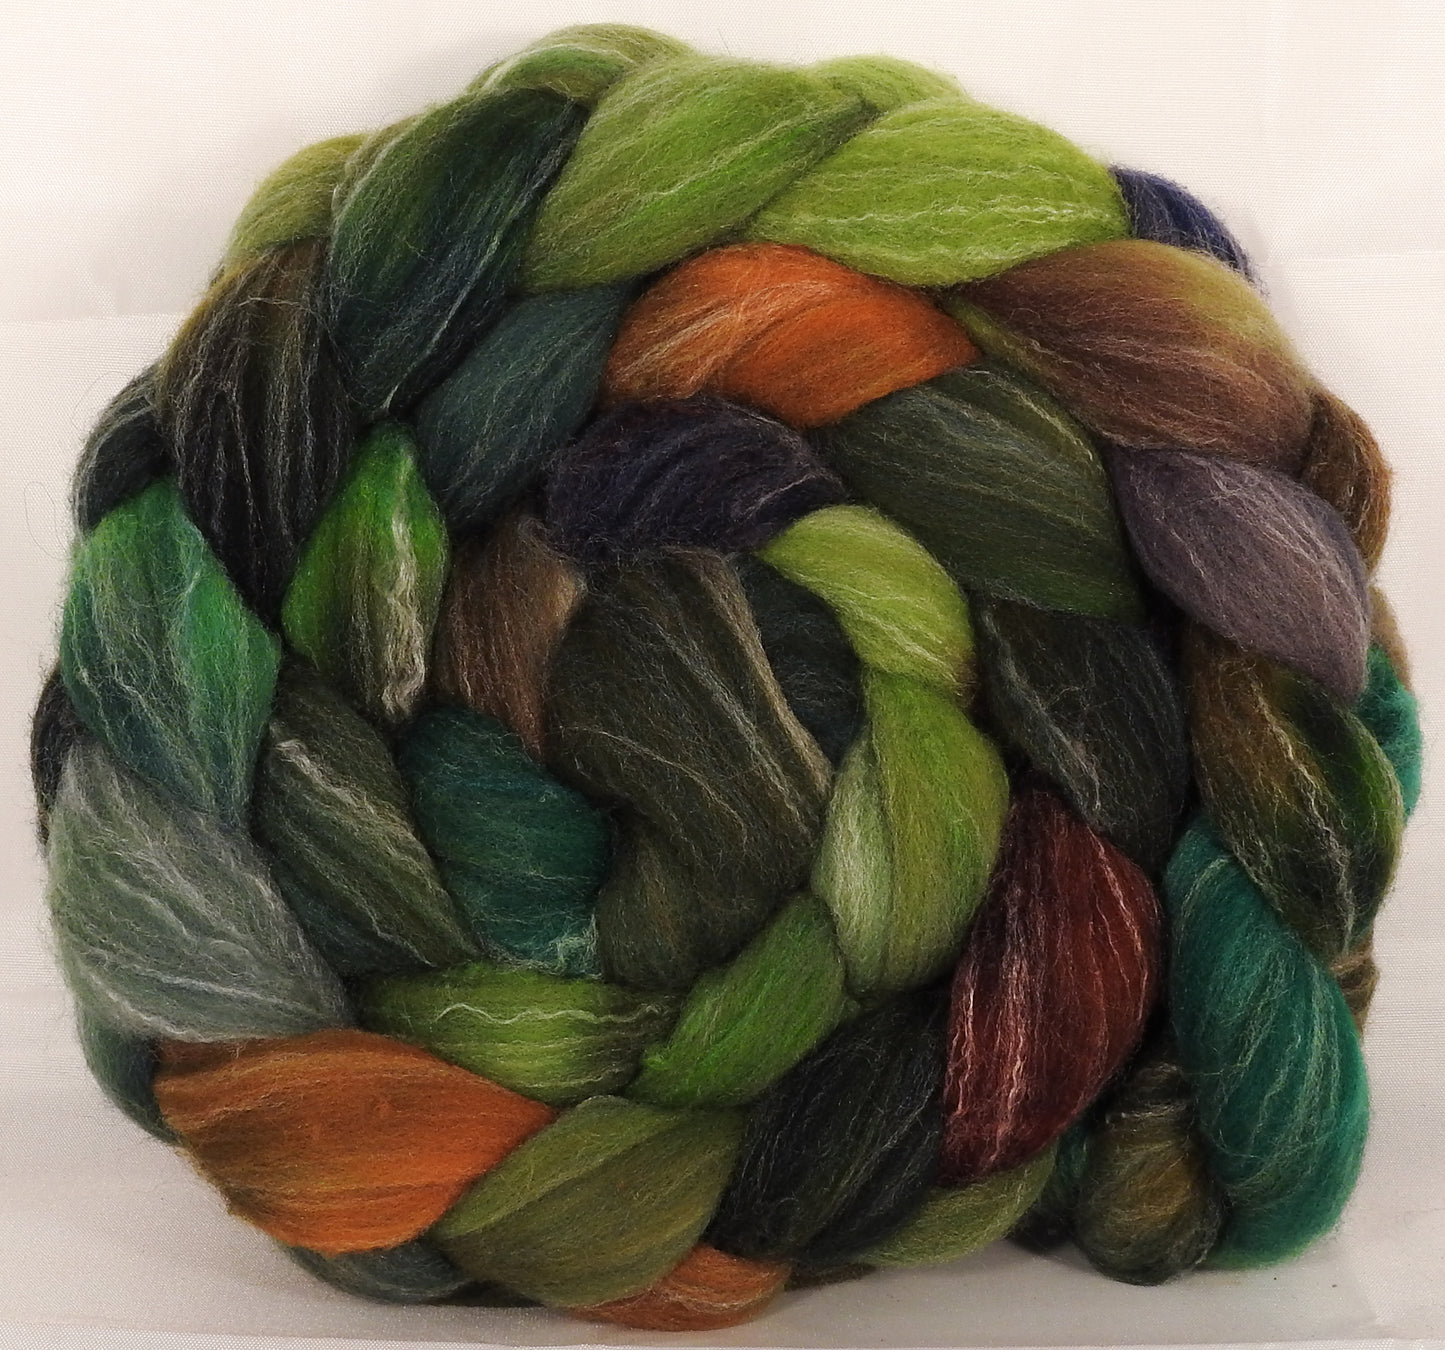 Hand dyed top for spinning -Mossy- (5.2 oz.) Targhee/silk/ bamboo ( 80/10/10) - Inglenook Fibers